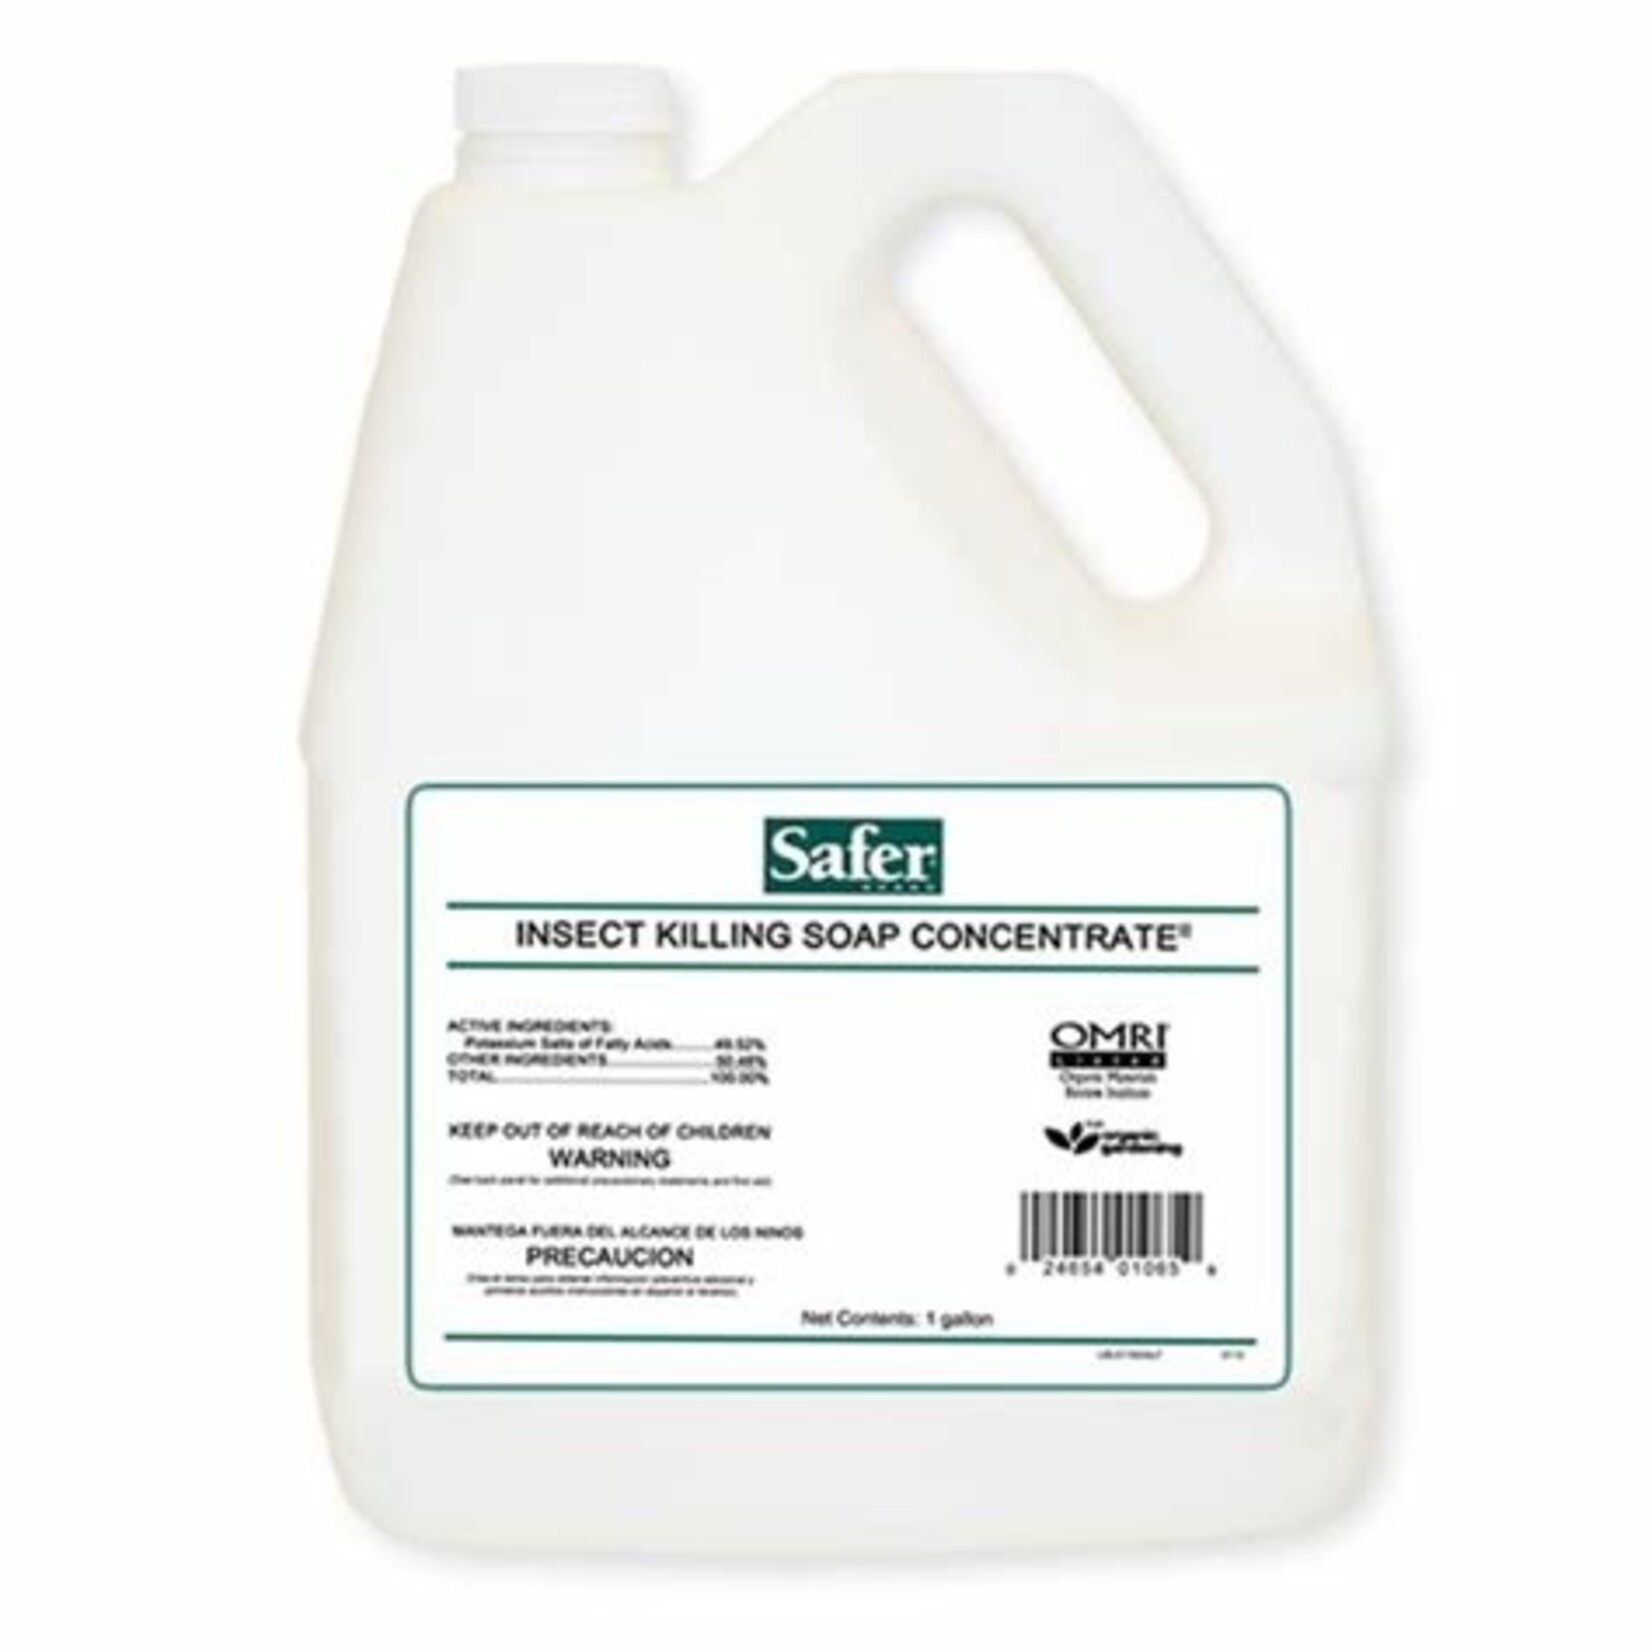 Safer Safer Insect Killing Soap Concentrate, 1 Gal